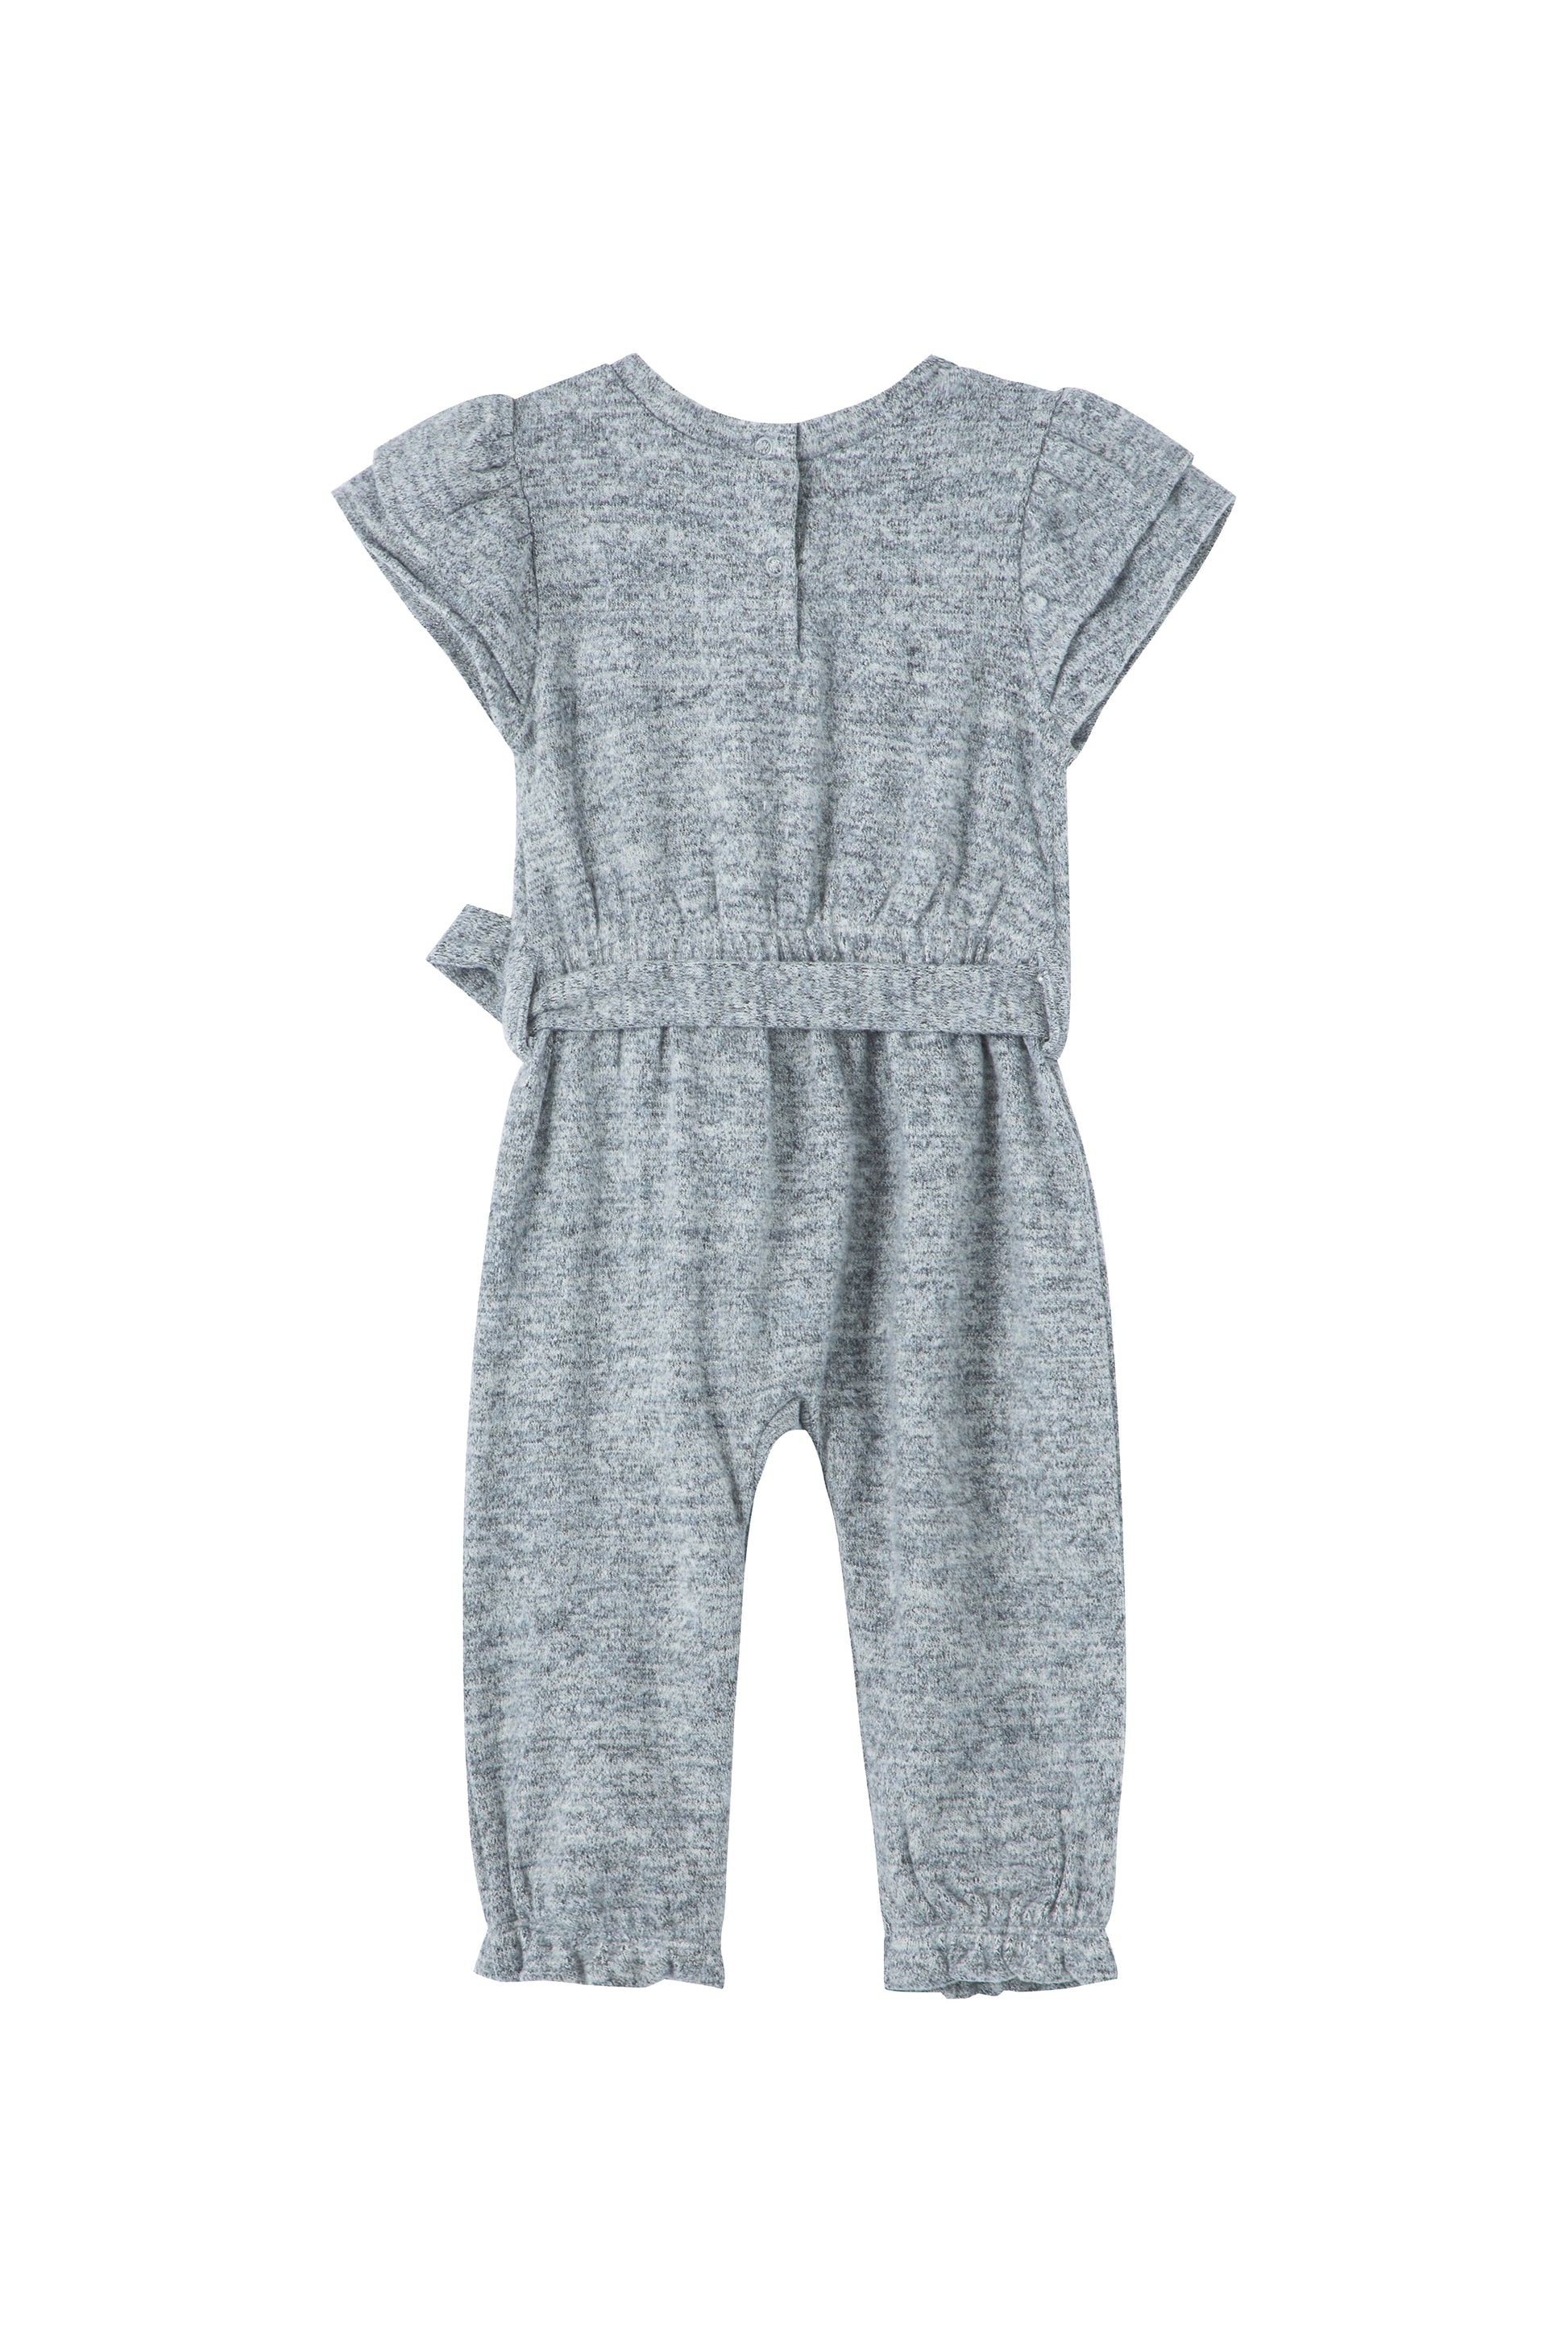 Back view of grey knit jumpsuit 